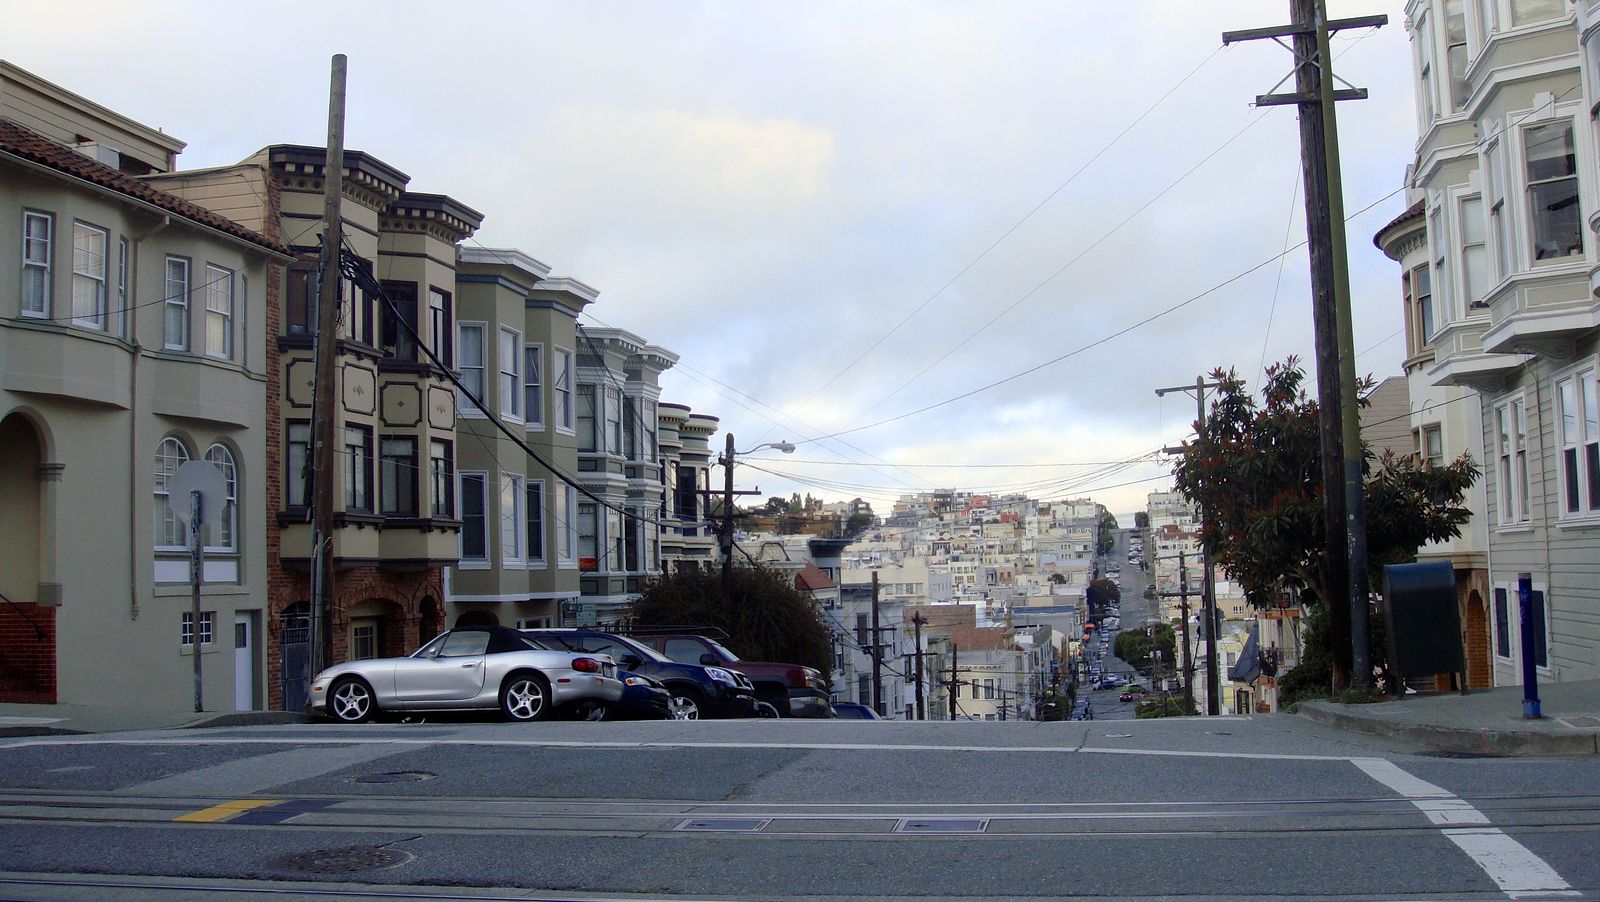 The viewpoint of the city scene in Homeward Bound II: Lost in San Francisco